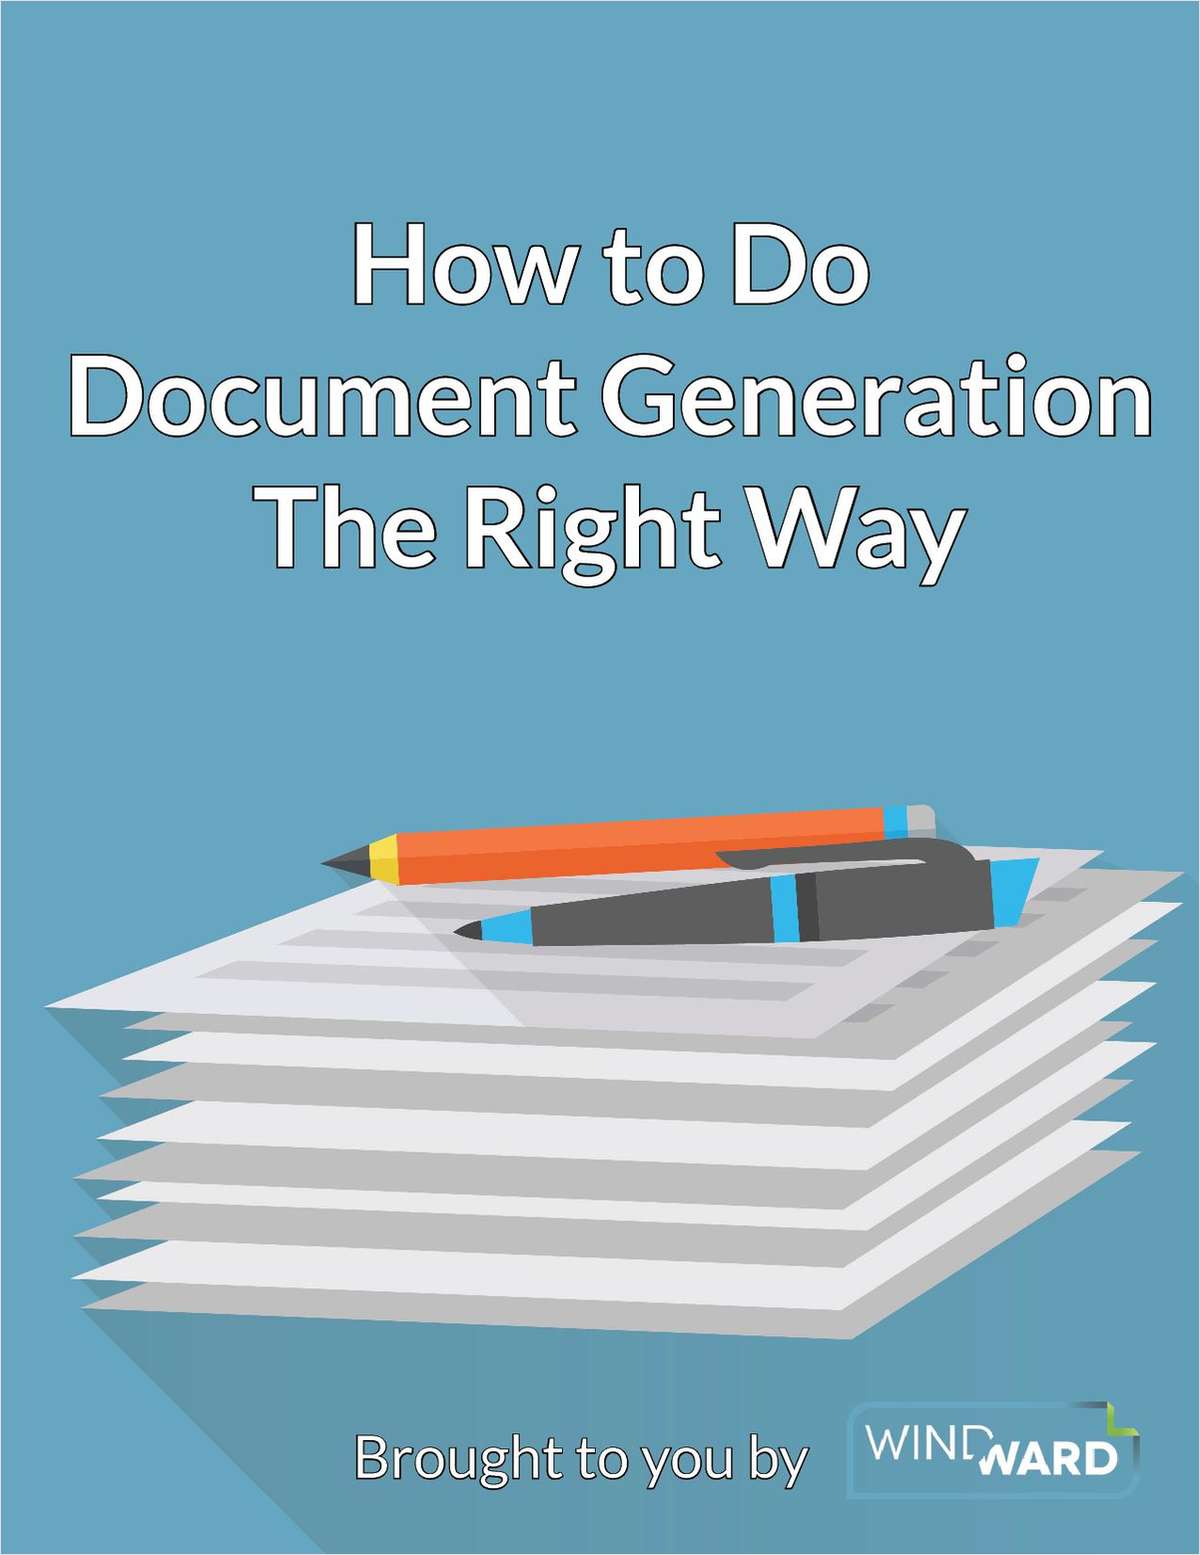 Tips and Tricks for Great Document Generation